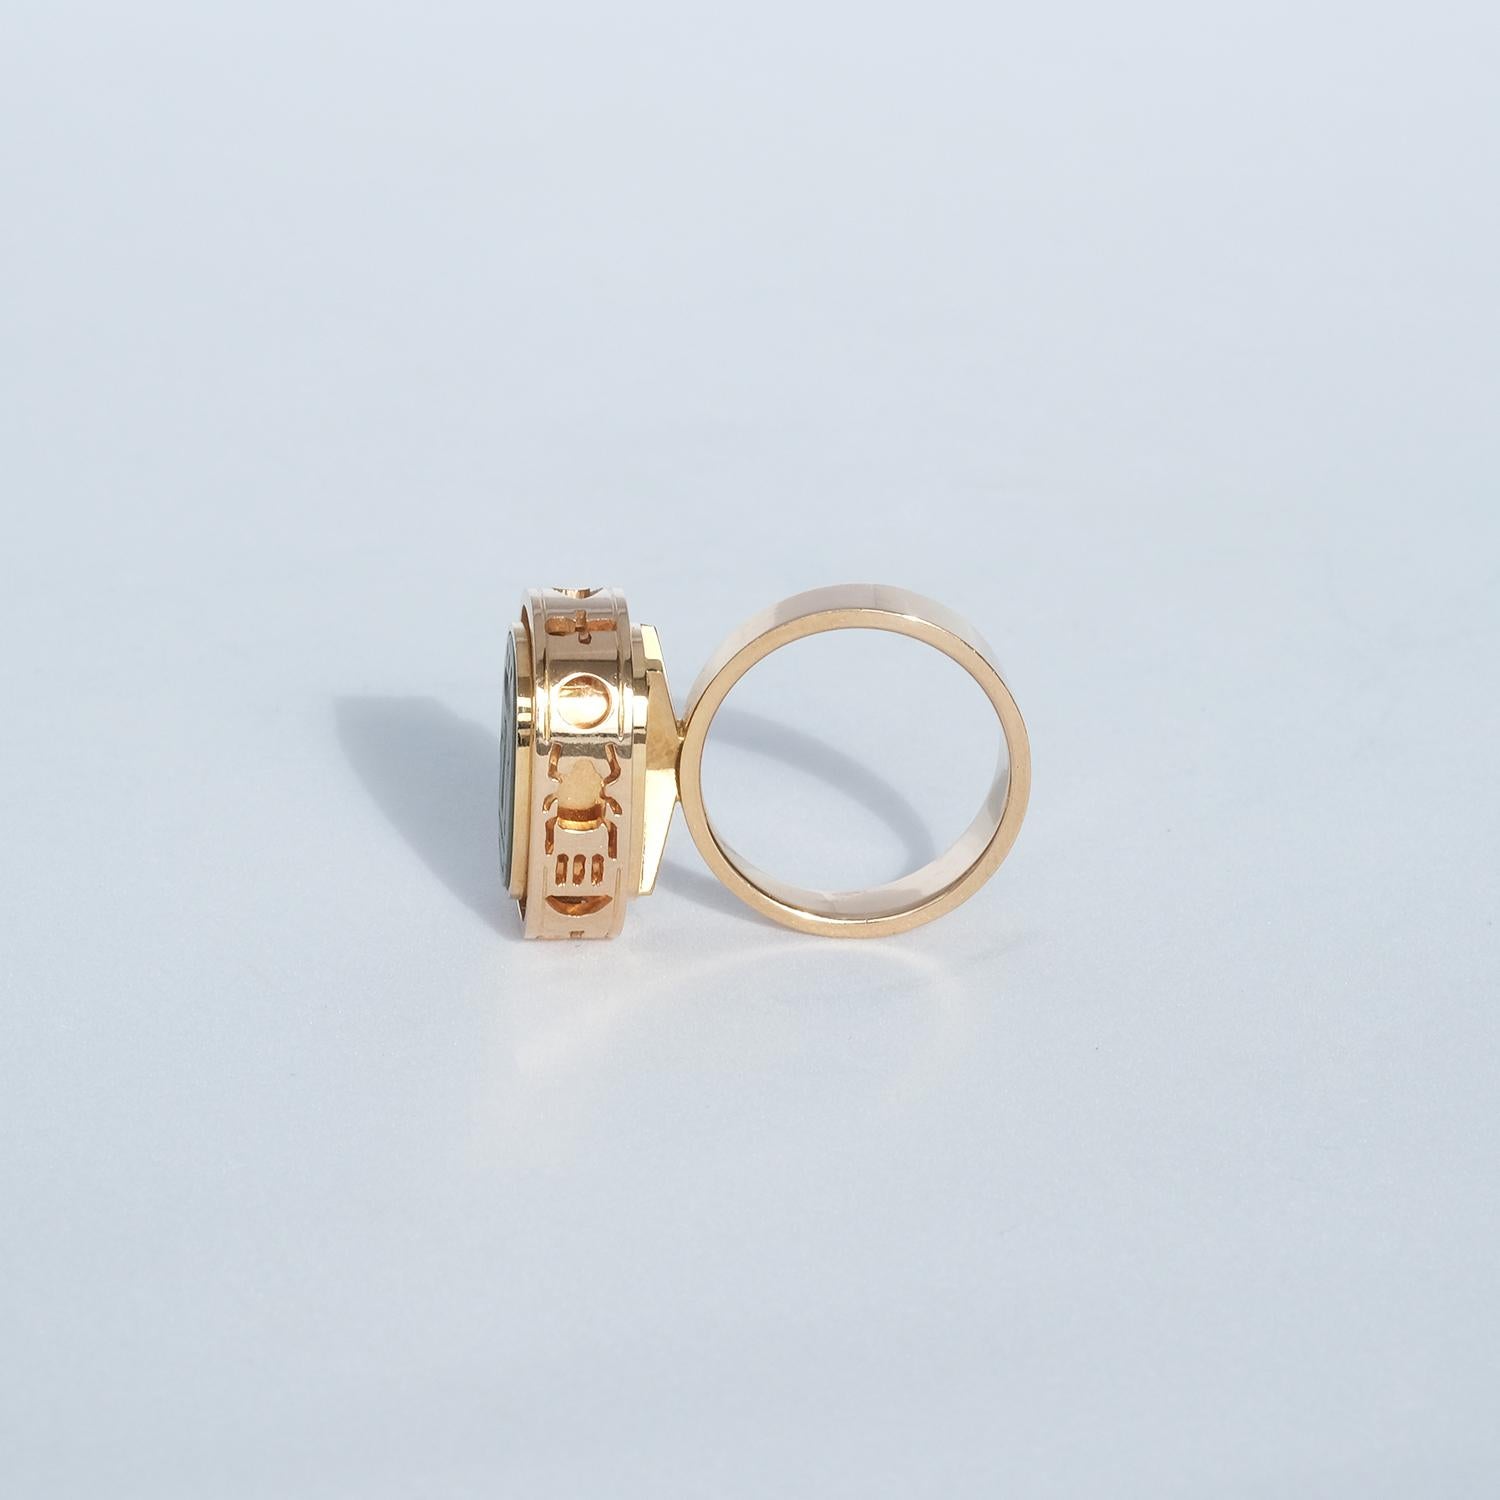 18 K Gold Ring with an Unusual Egyptian Design, Swedish Made 1978 For Sale 7